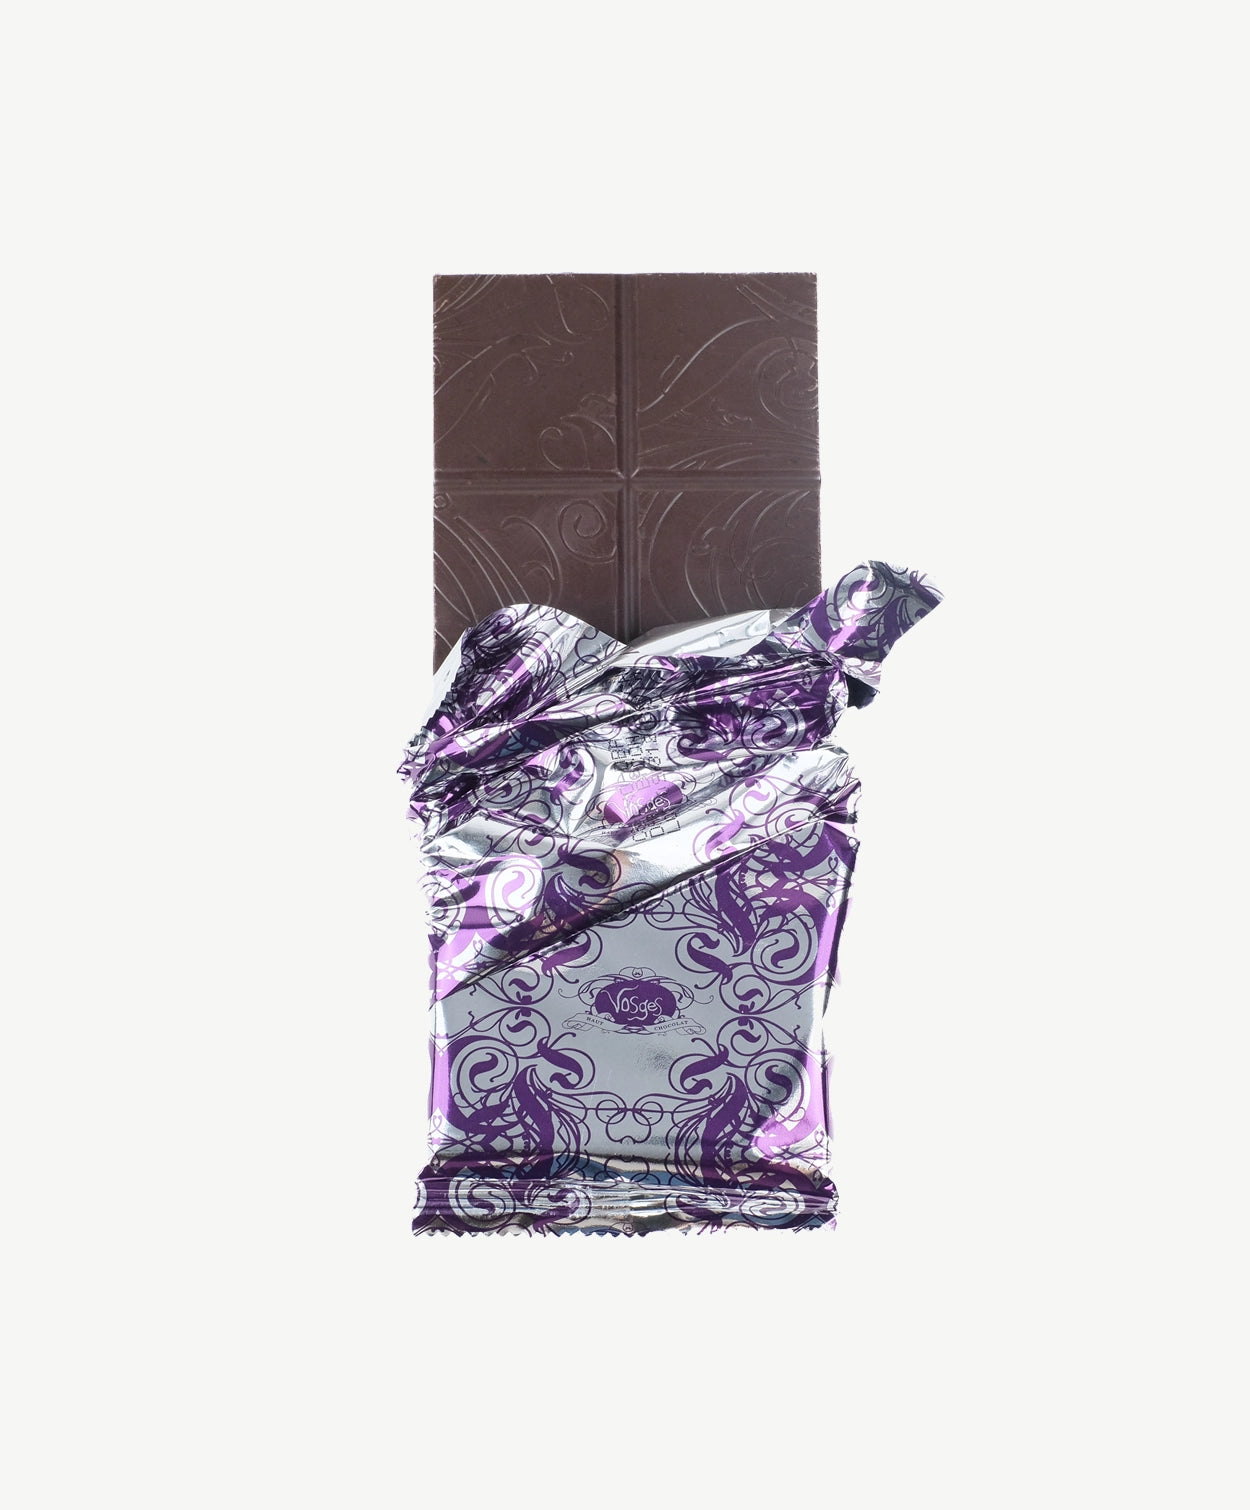 An opened Vosges Pink Salt Caramel Chocolate bar in a silver wrapper stands upright on a white background.